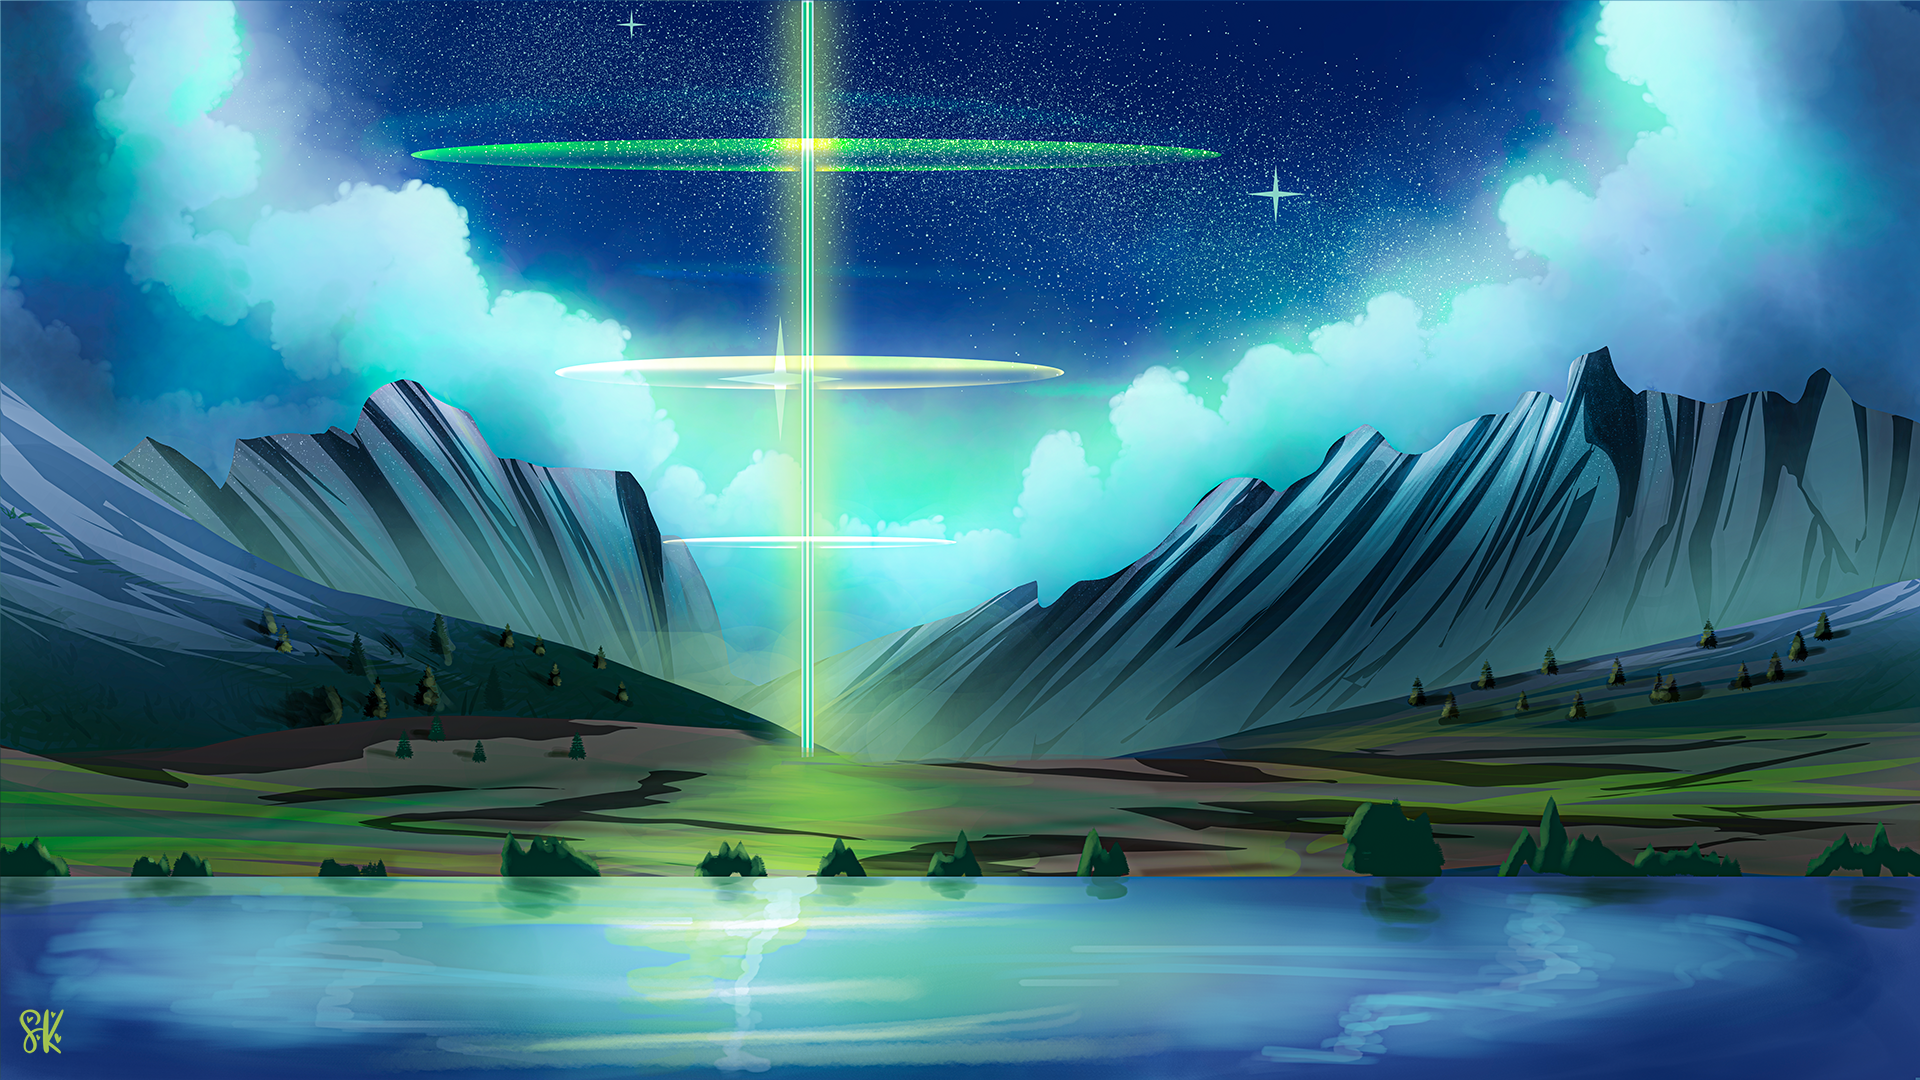 Mountain Top Grass Beam Clouds Lake Reflection Pool Shining Reflection Stars Flares 1920x1080